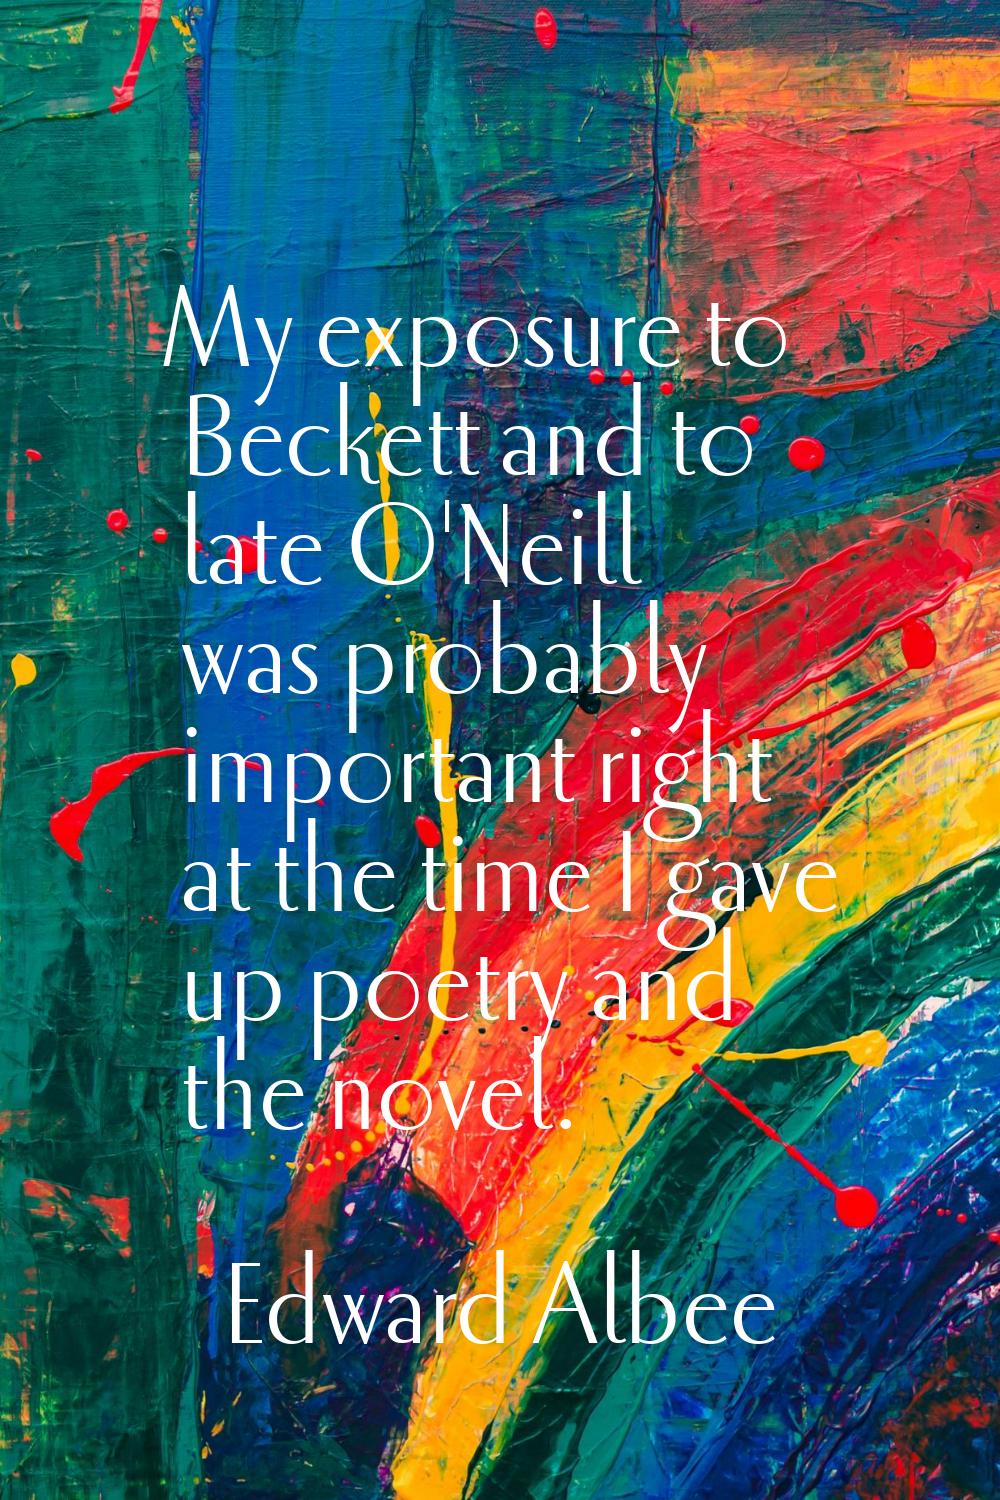 My exposure to Beckett and to late O'Neill was probably important right at the time I gave up poetr